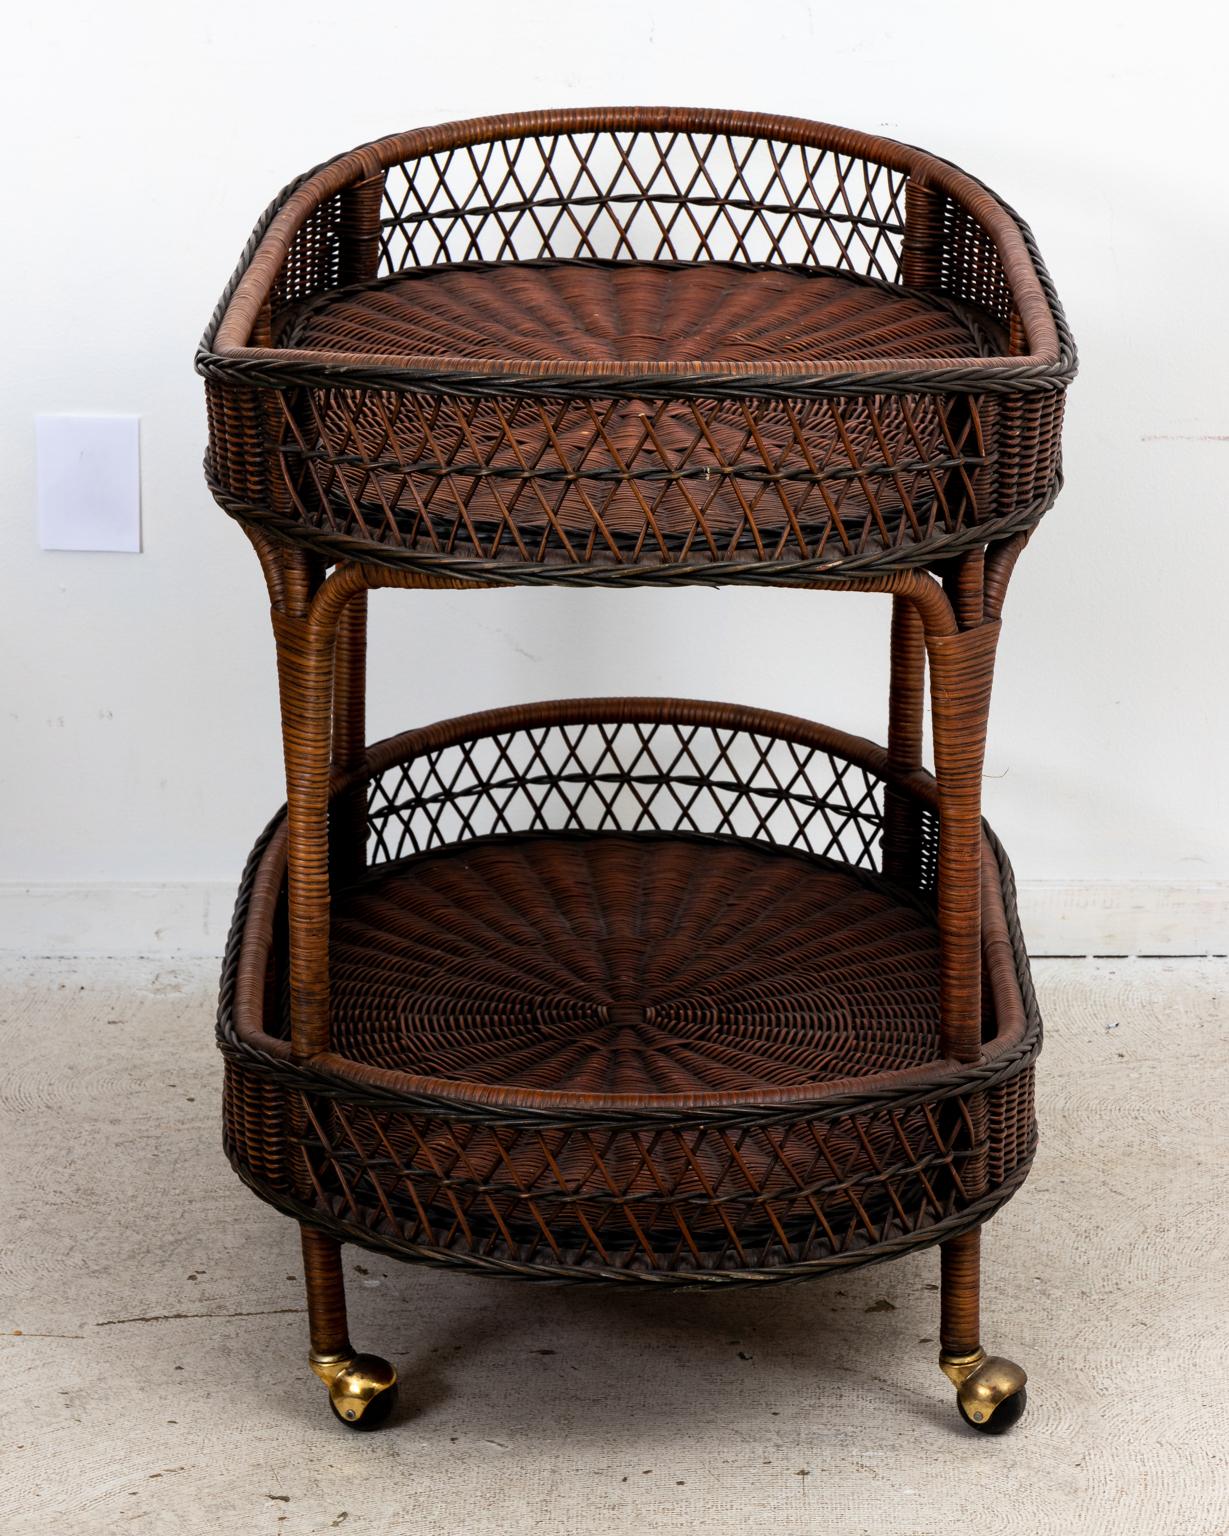 Circa 1940s two tier bar cart on brass wheels with braided wicker rattan trim. Please note of wear consistent with age including minor finish loss to the wicker and patina to the brass.